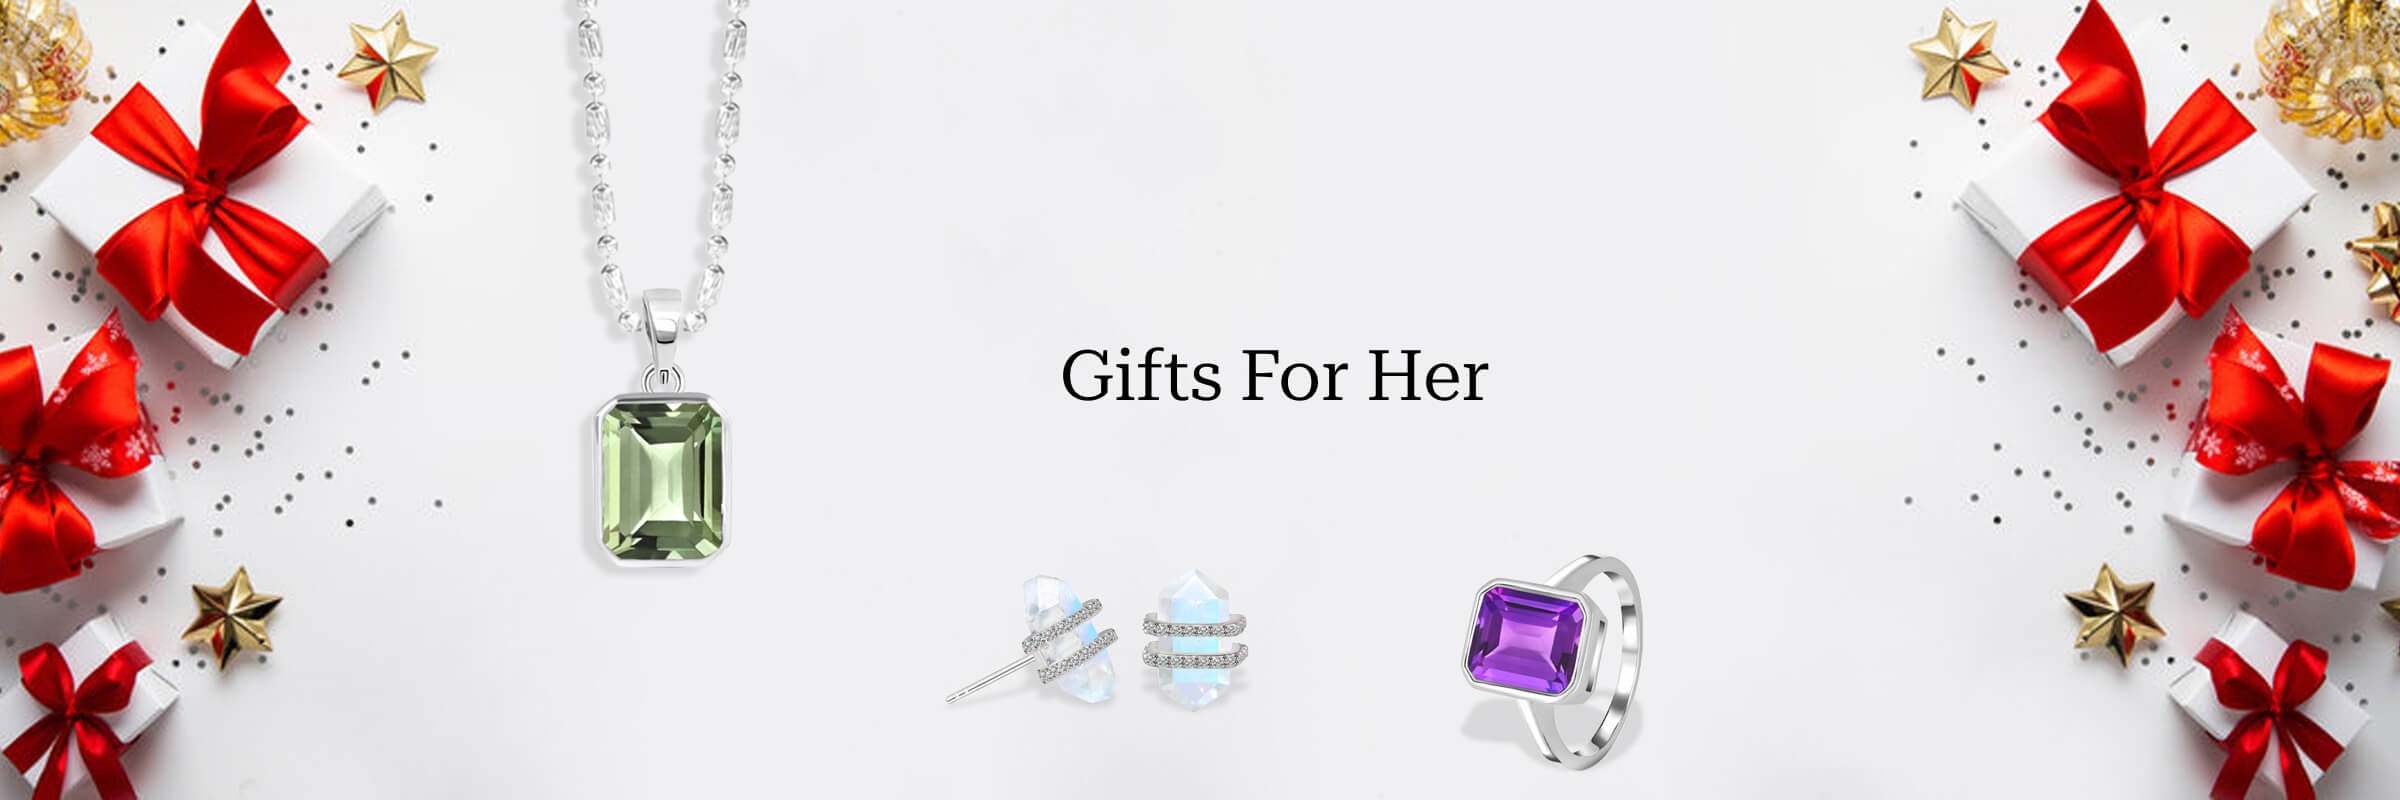 Christmas Gifts For Your Lady Love